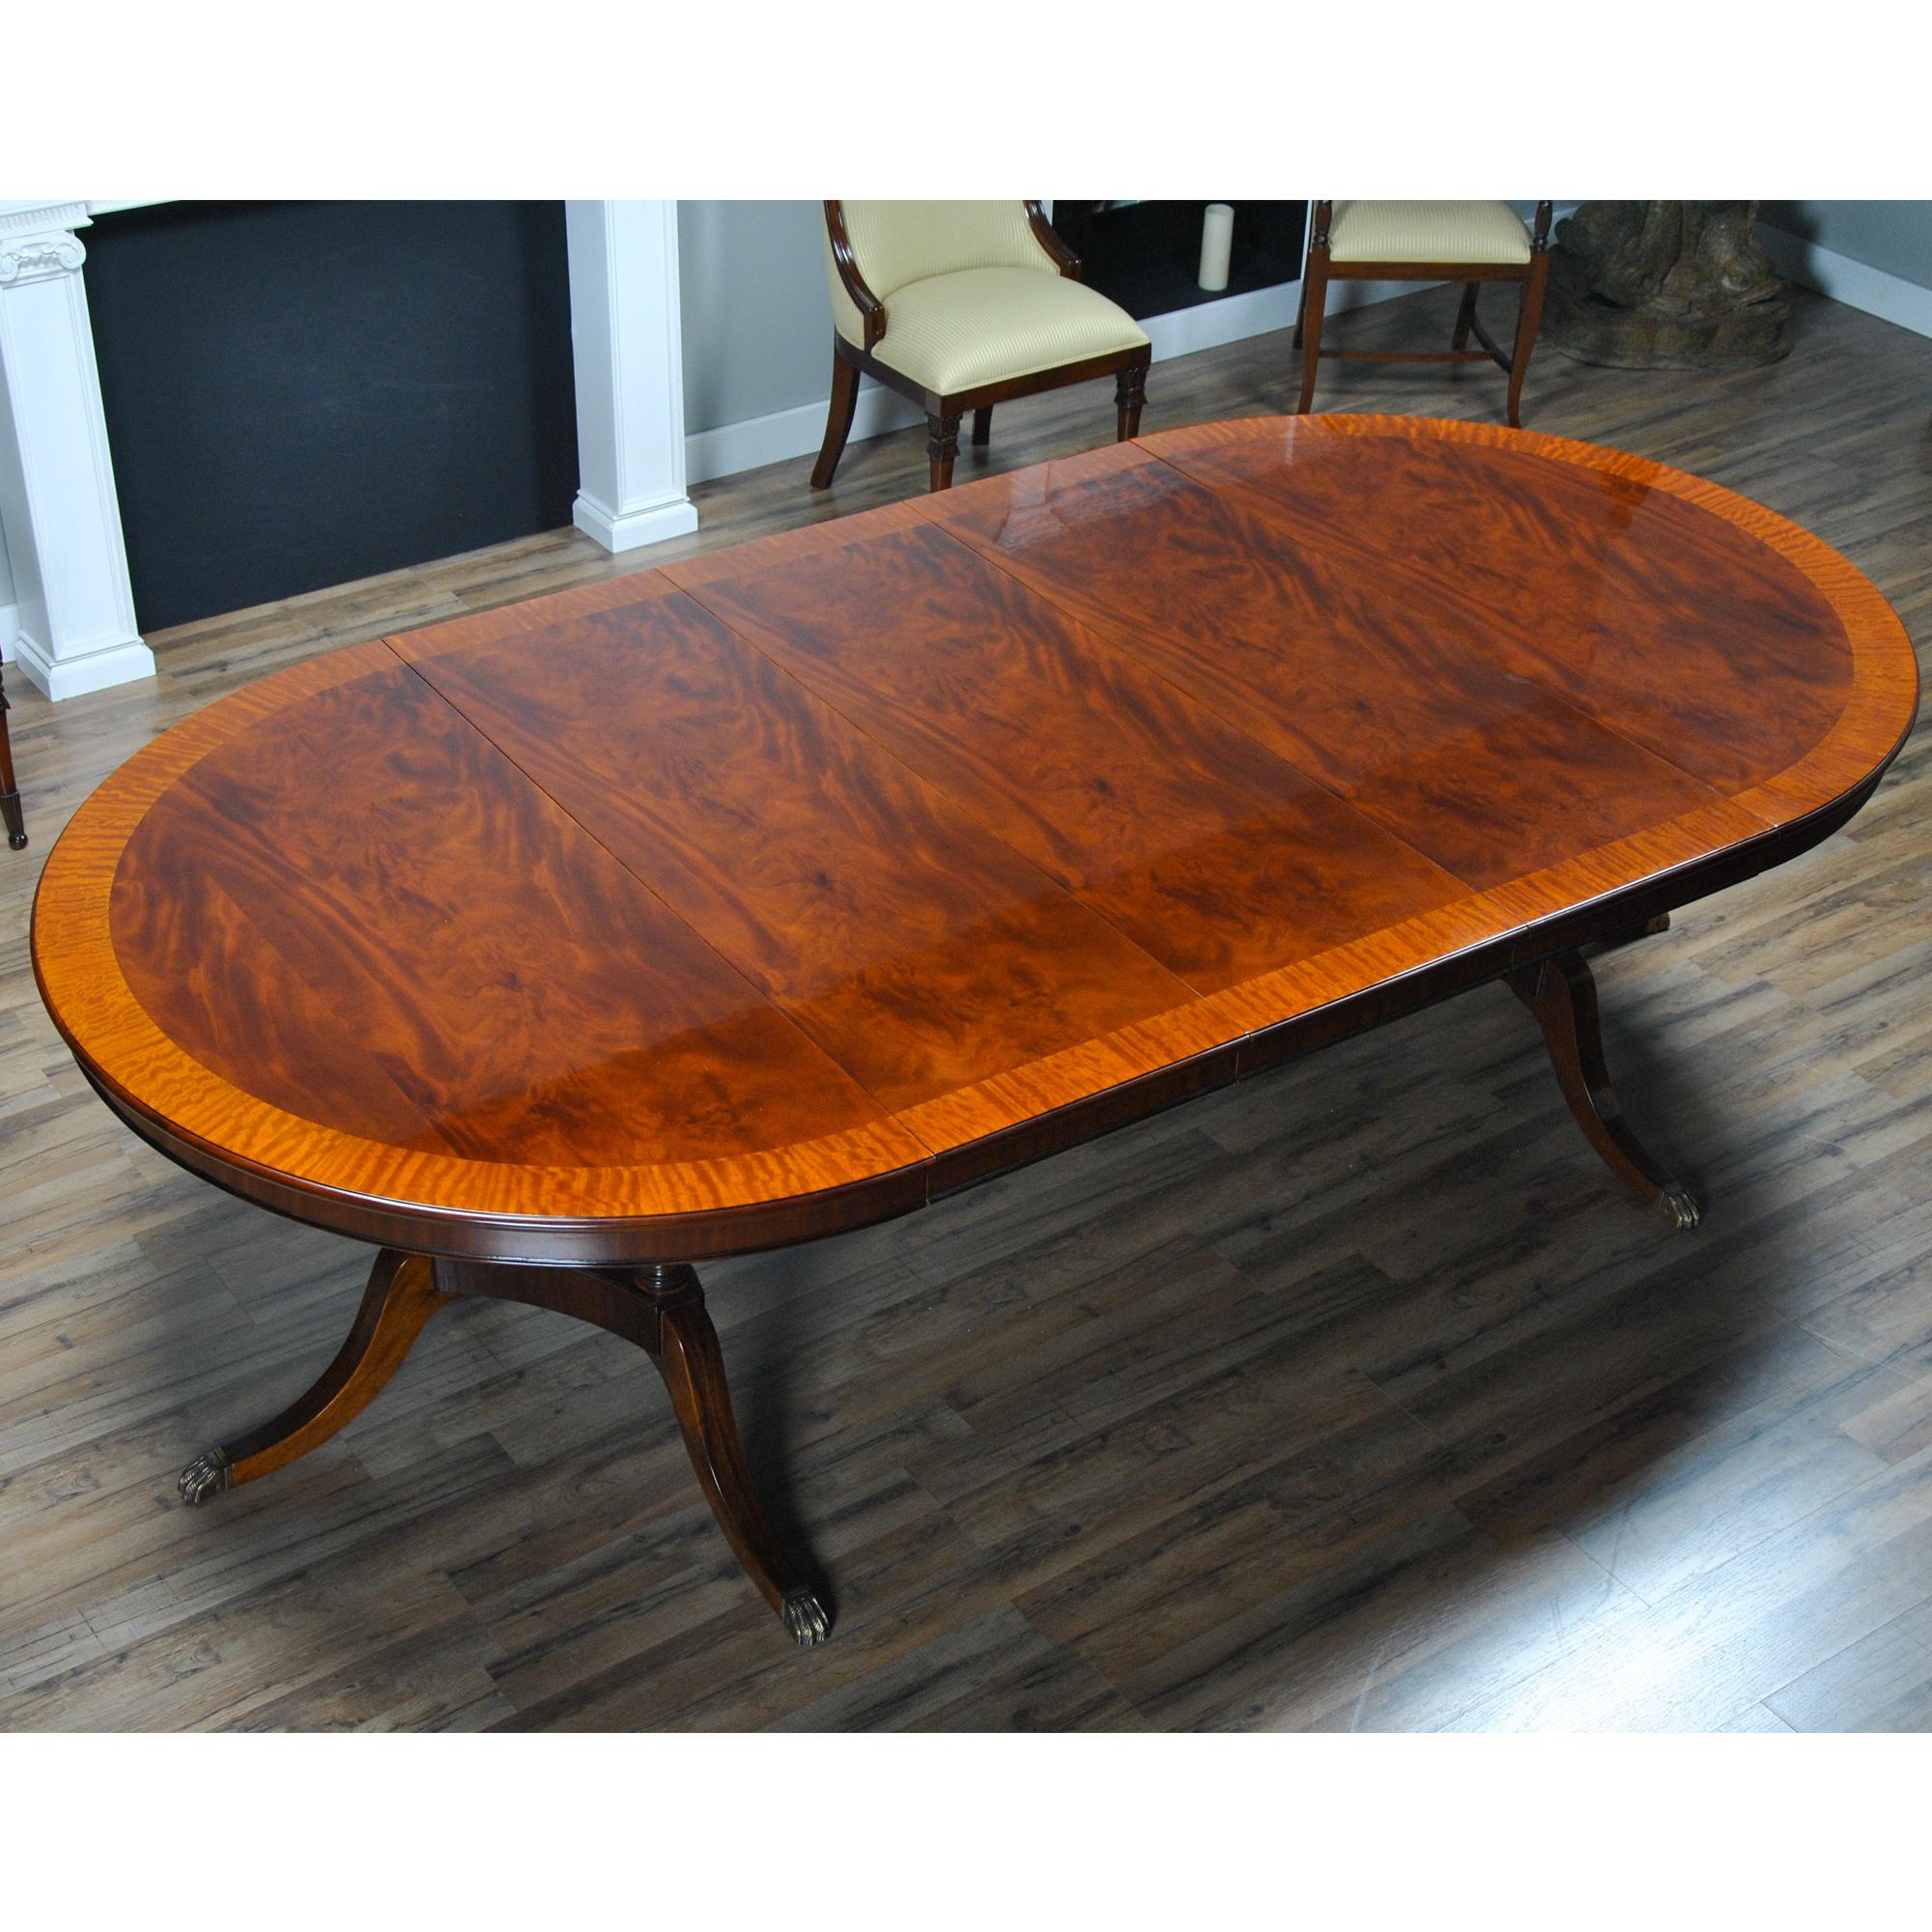 American Classical Round Dining Table 60-115 inch For Sale